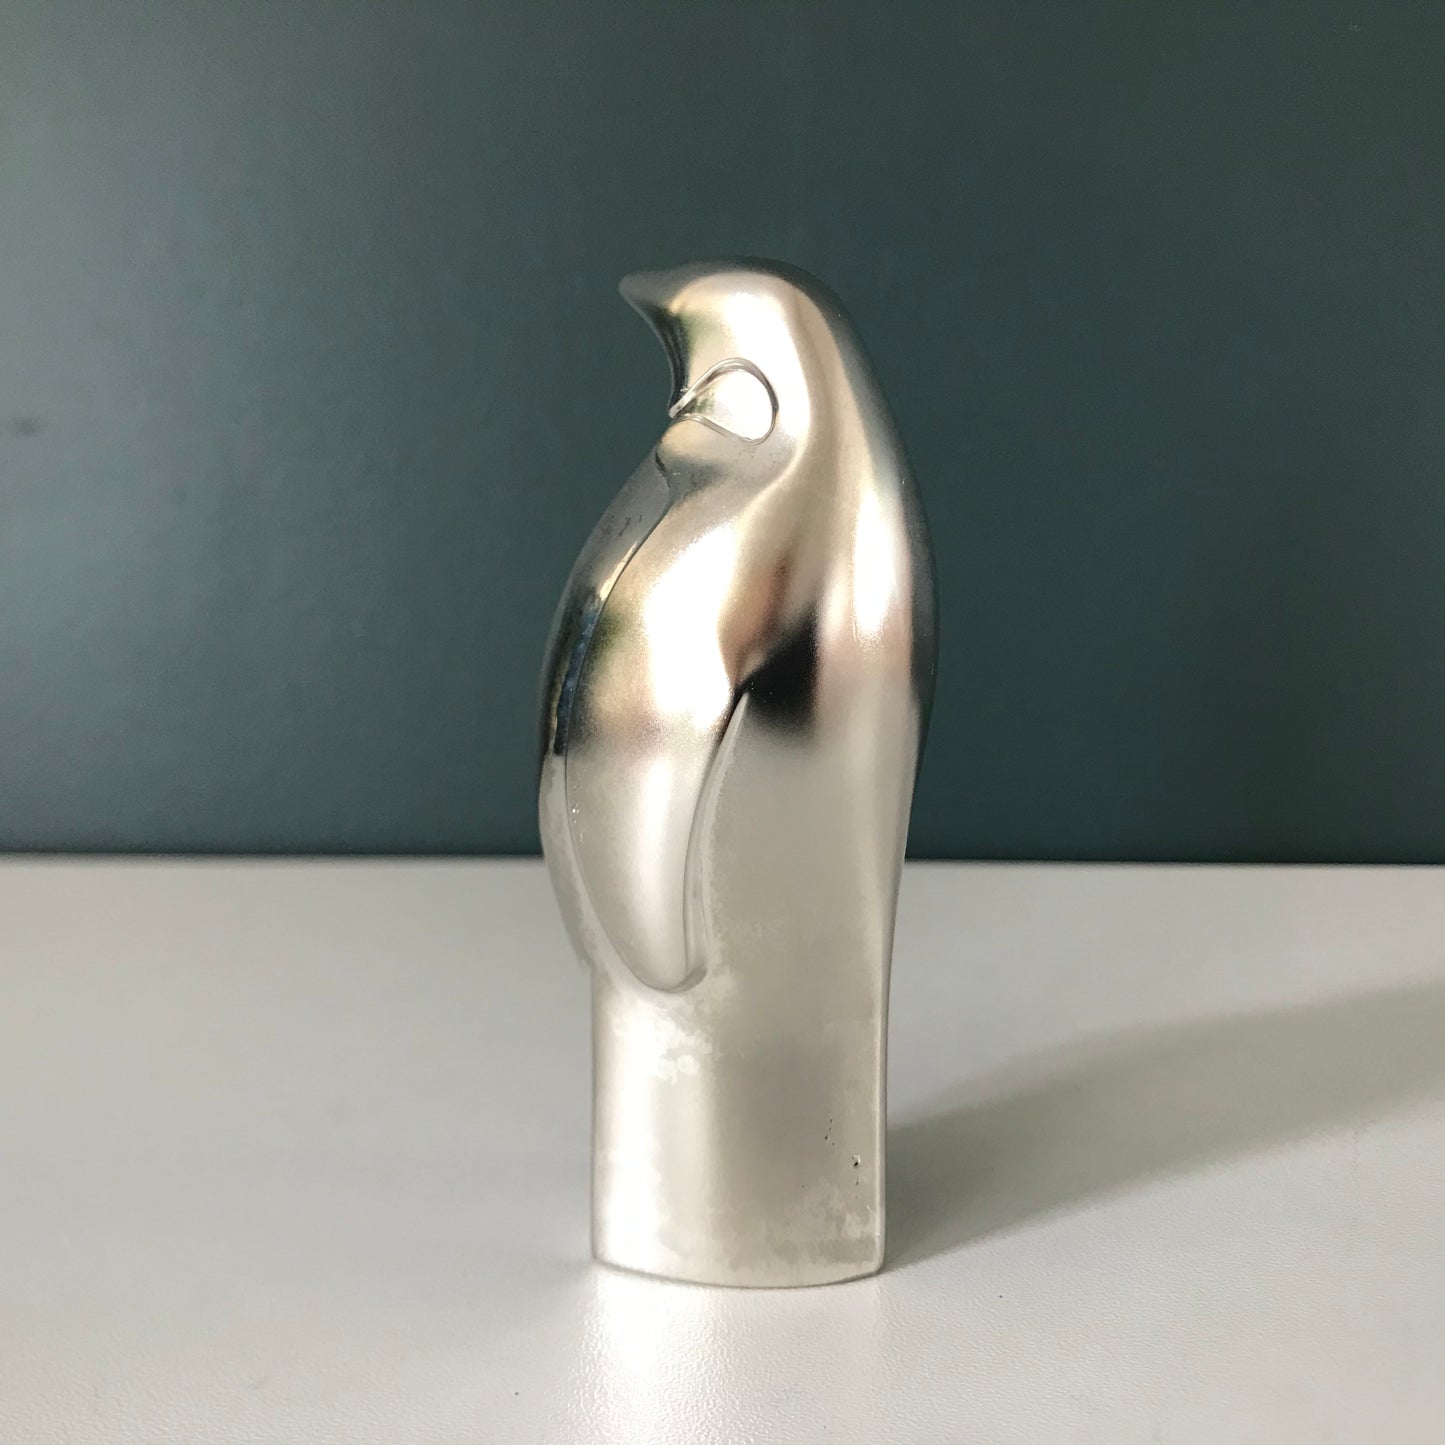 Boxed Dansk Designs Silver Penguin Paperweight Swedish Home Office Work Gift Present